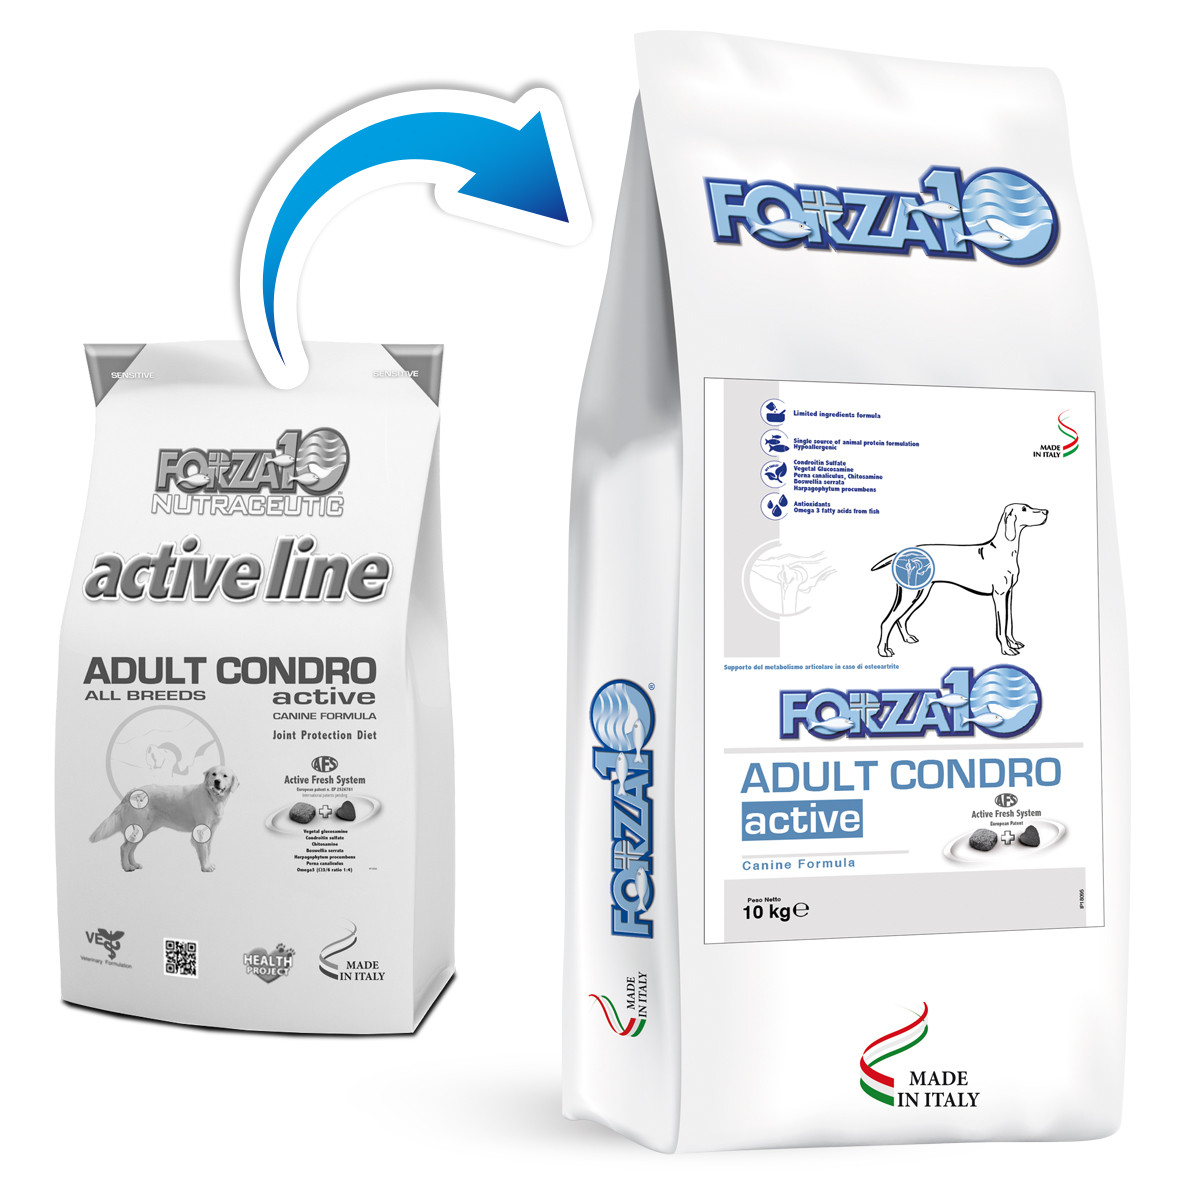 Forza10 Active Line Adult Condro Active: 10 kg